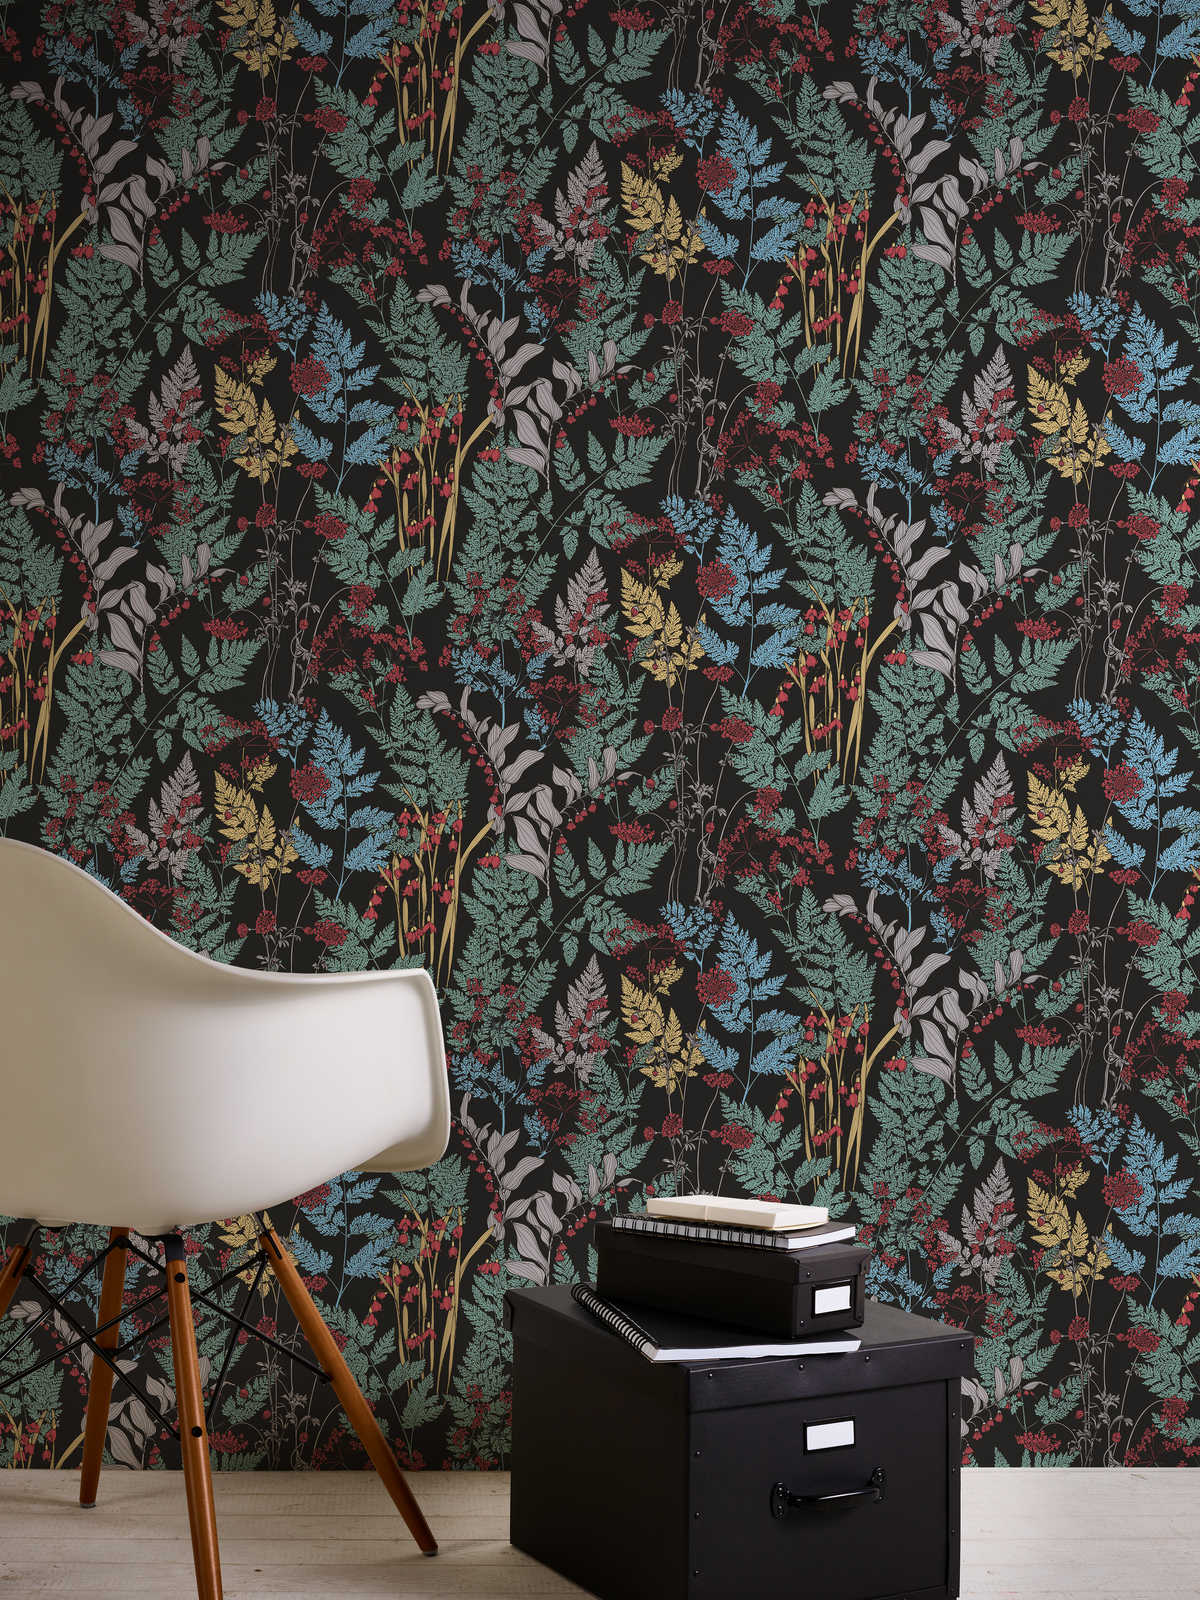             Non-woven wallpaper flowers & leaves motif in drawing style - black, green, yellow
        